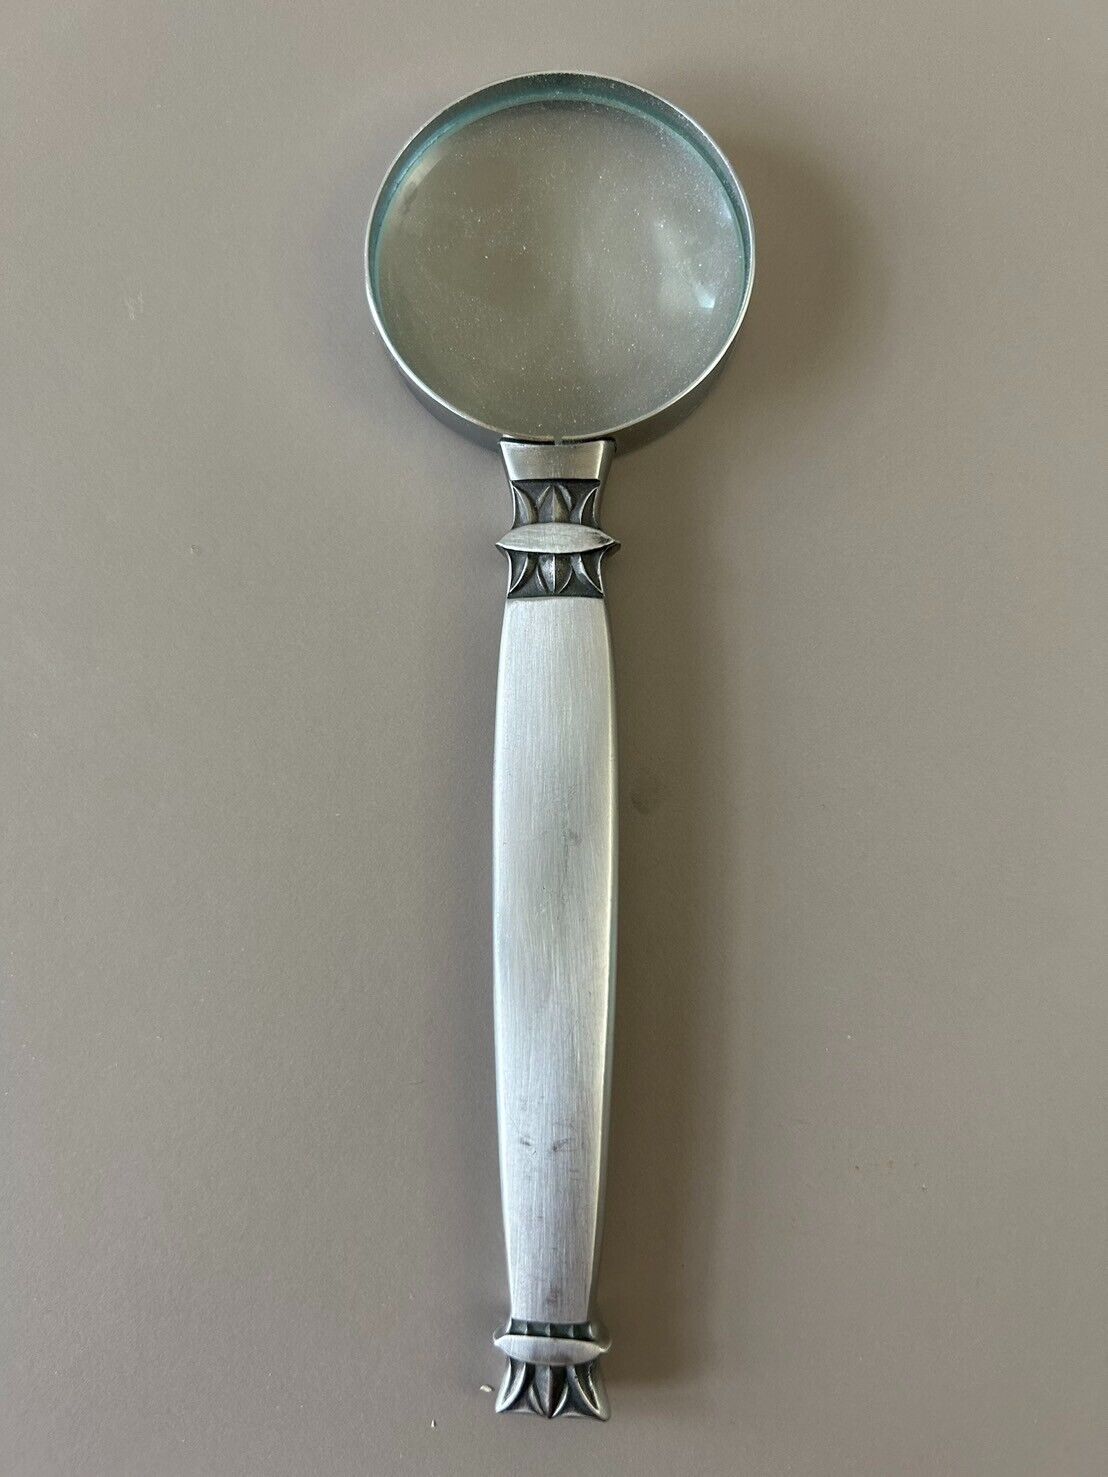 Antique Japanese Decorative Table Magnifying Glass with Stainless Steel